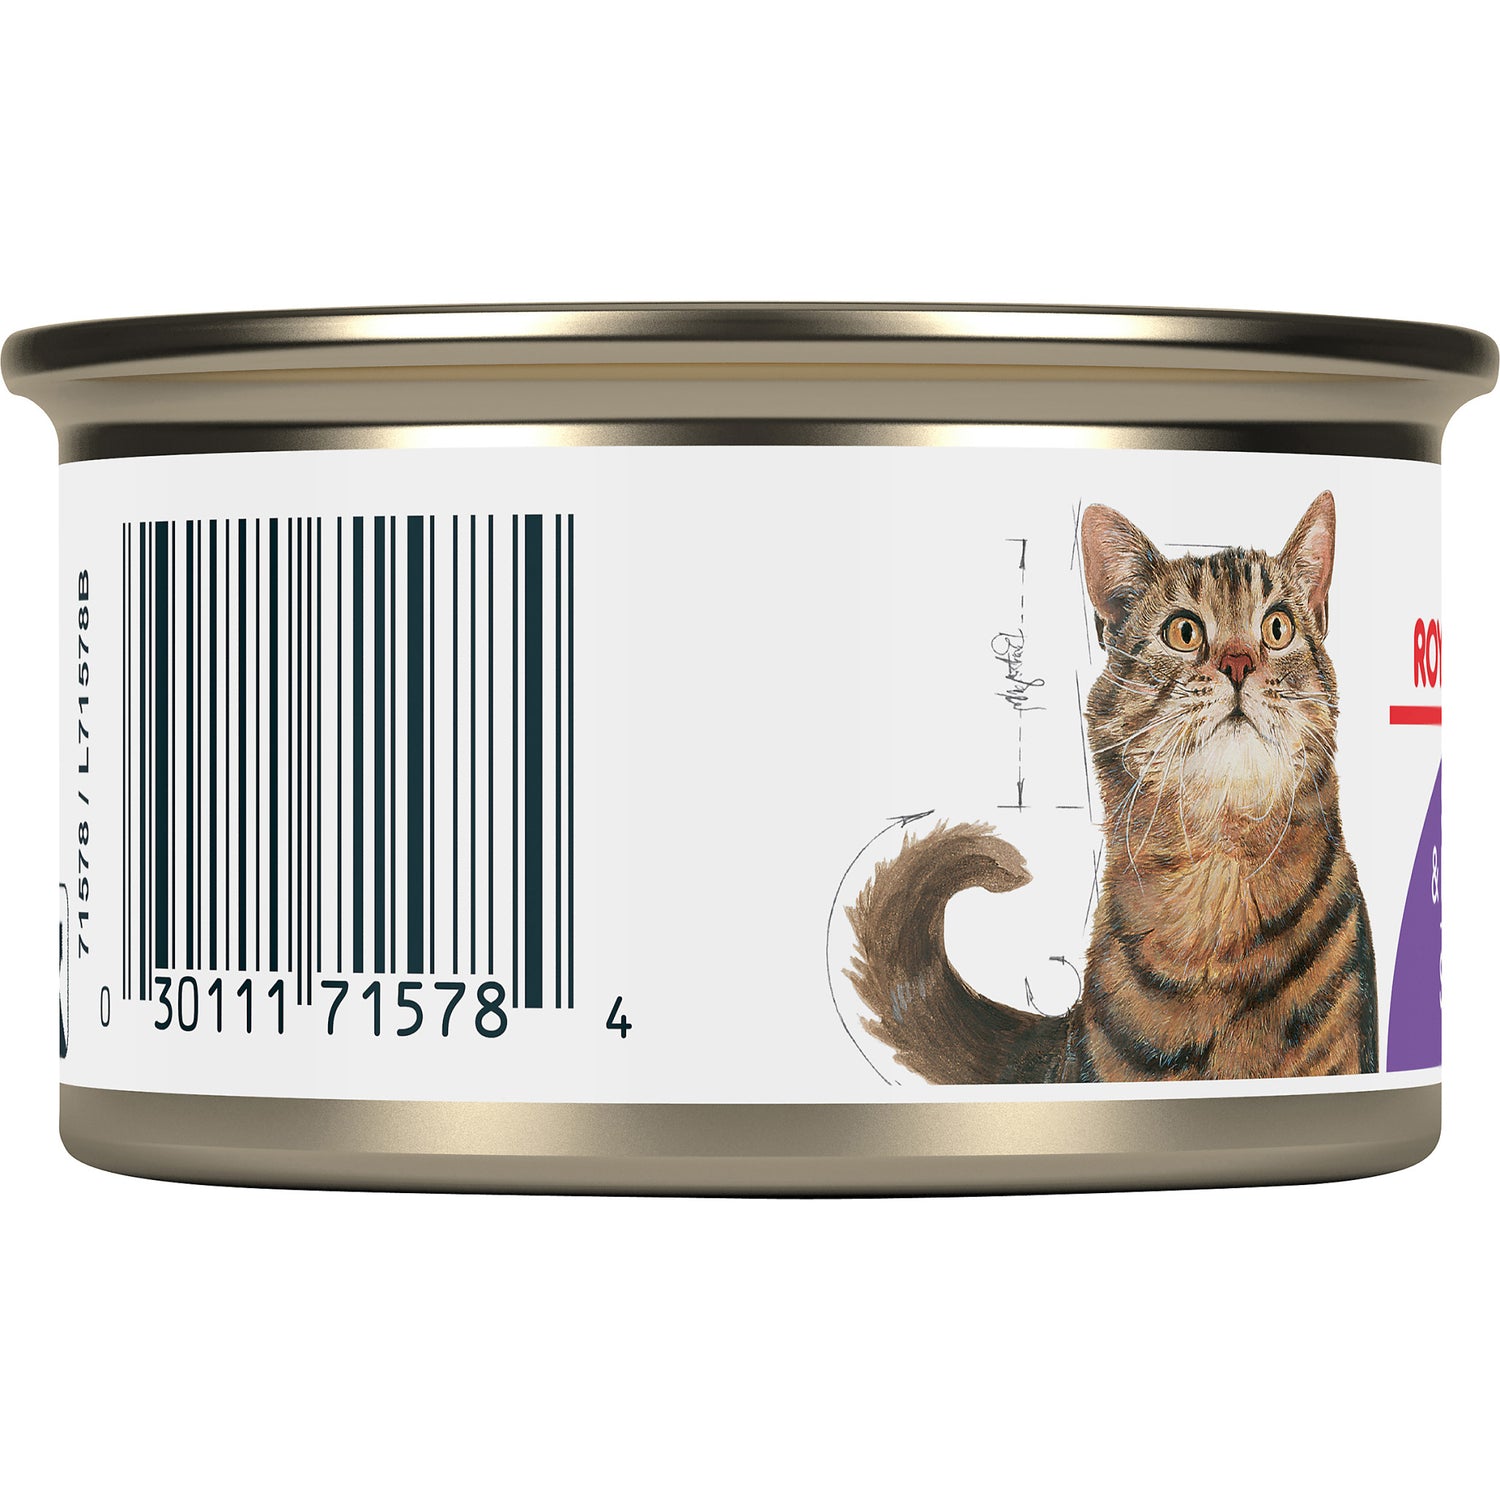 Royal Canin® Feline Health Nutrition™ Spayed/Neutered Thin Slices In Gravy Canned Cat Food